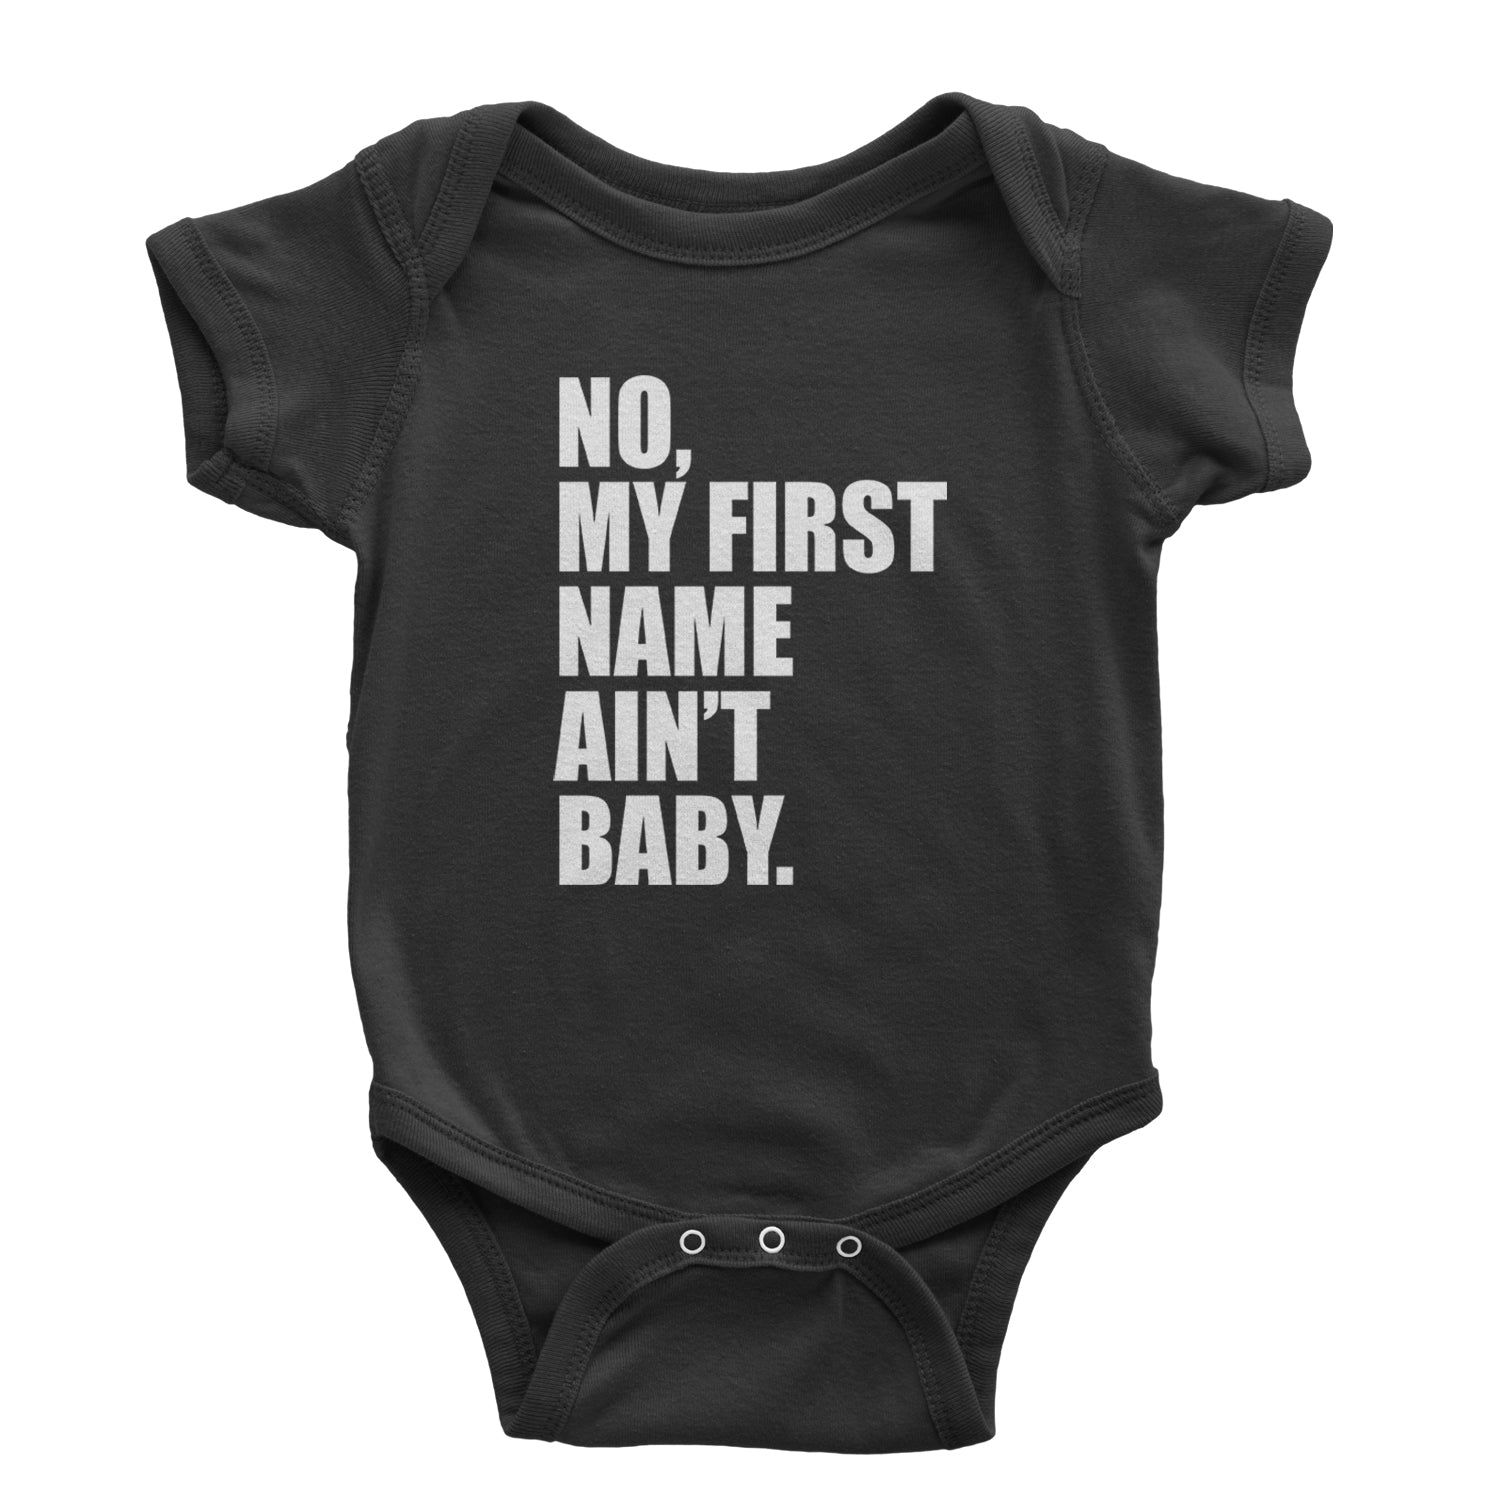 No My First Name Ain't Baby Together Again Infant One-Piece Romper Bodysuit and Toddler T-shirt